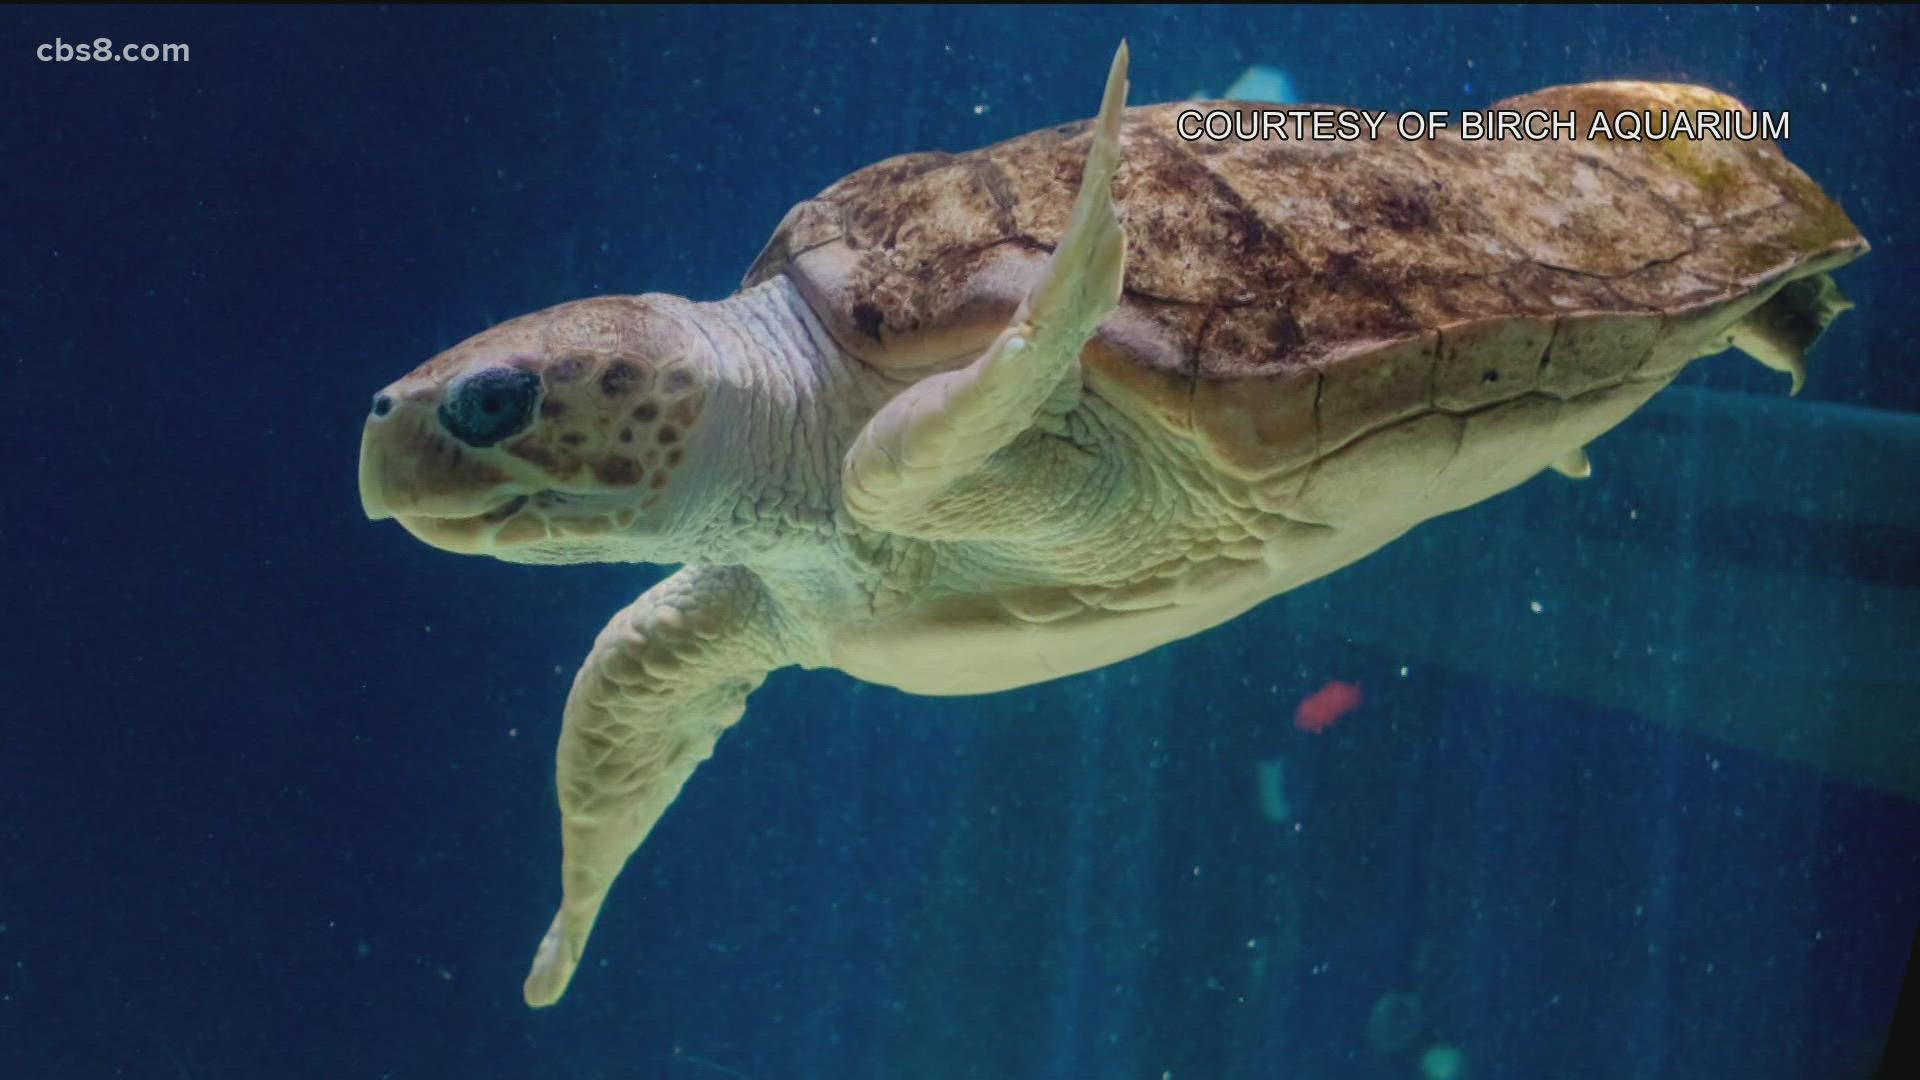 The turtle is believed to be one of a kind and will live out her days at Birch Aquarium due to issues with her hind flippers.